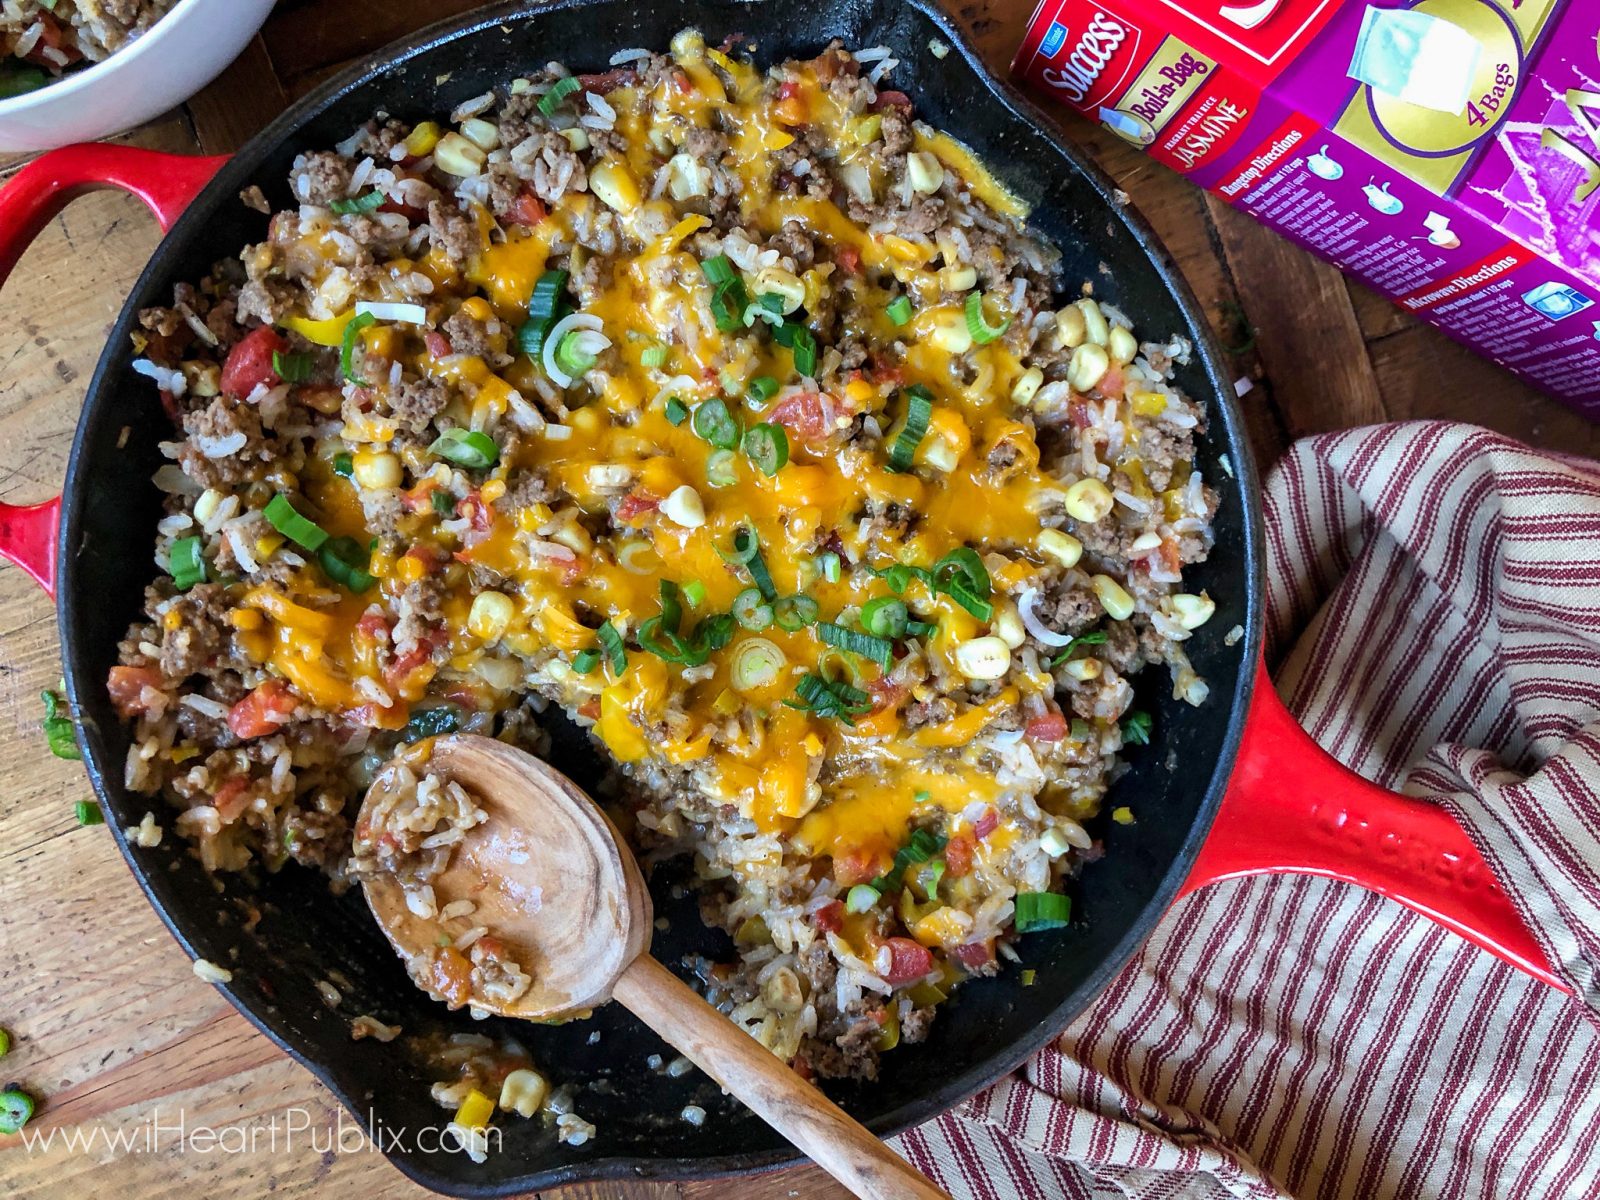 Southwestern Beef And Rice Skillet – Ultimate Quick And Easy Weeknight Meal!